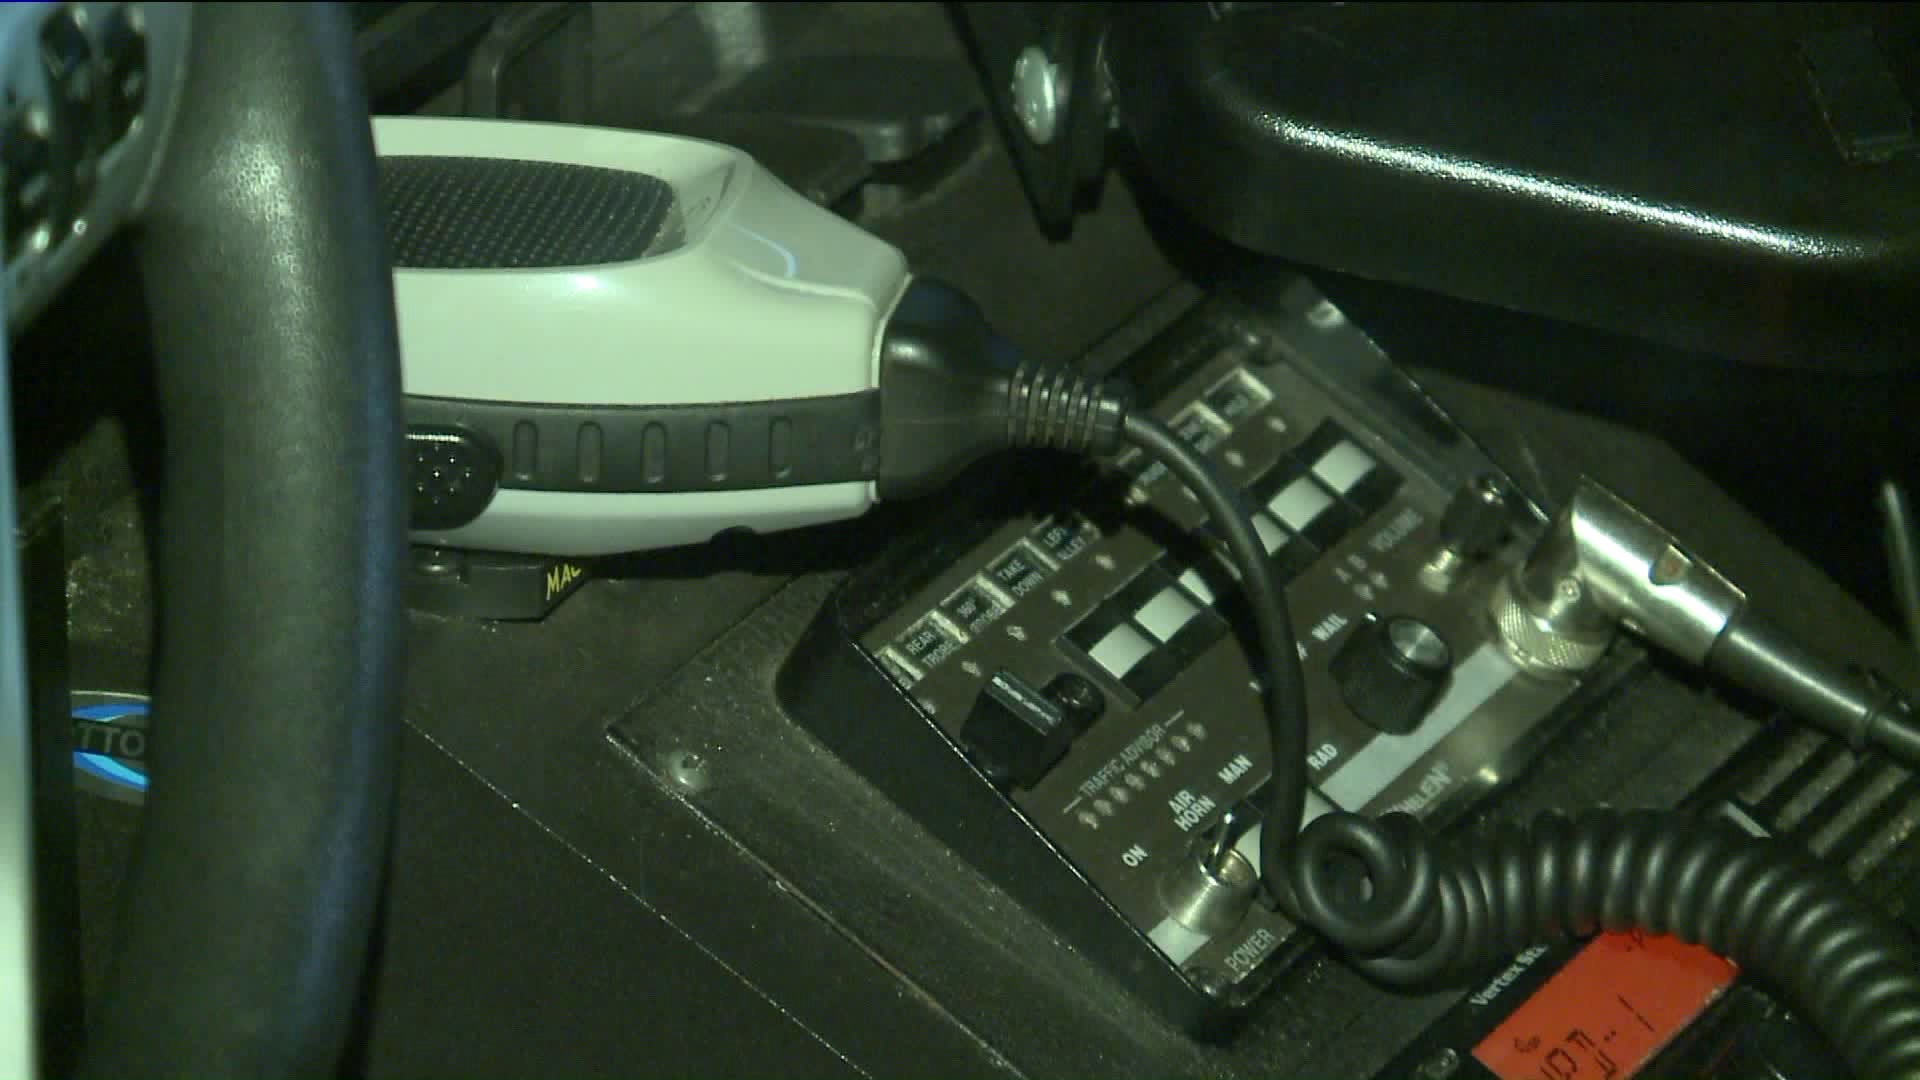 Norwich police officers say police radio system prevents clear communication